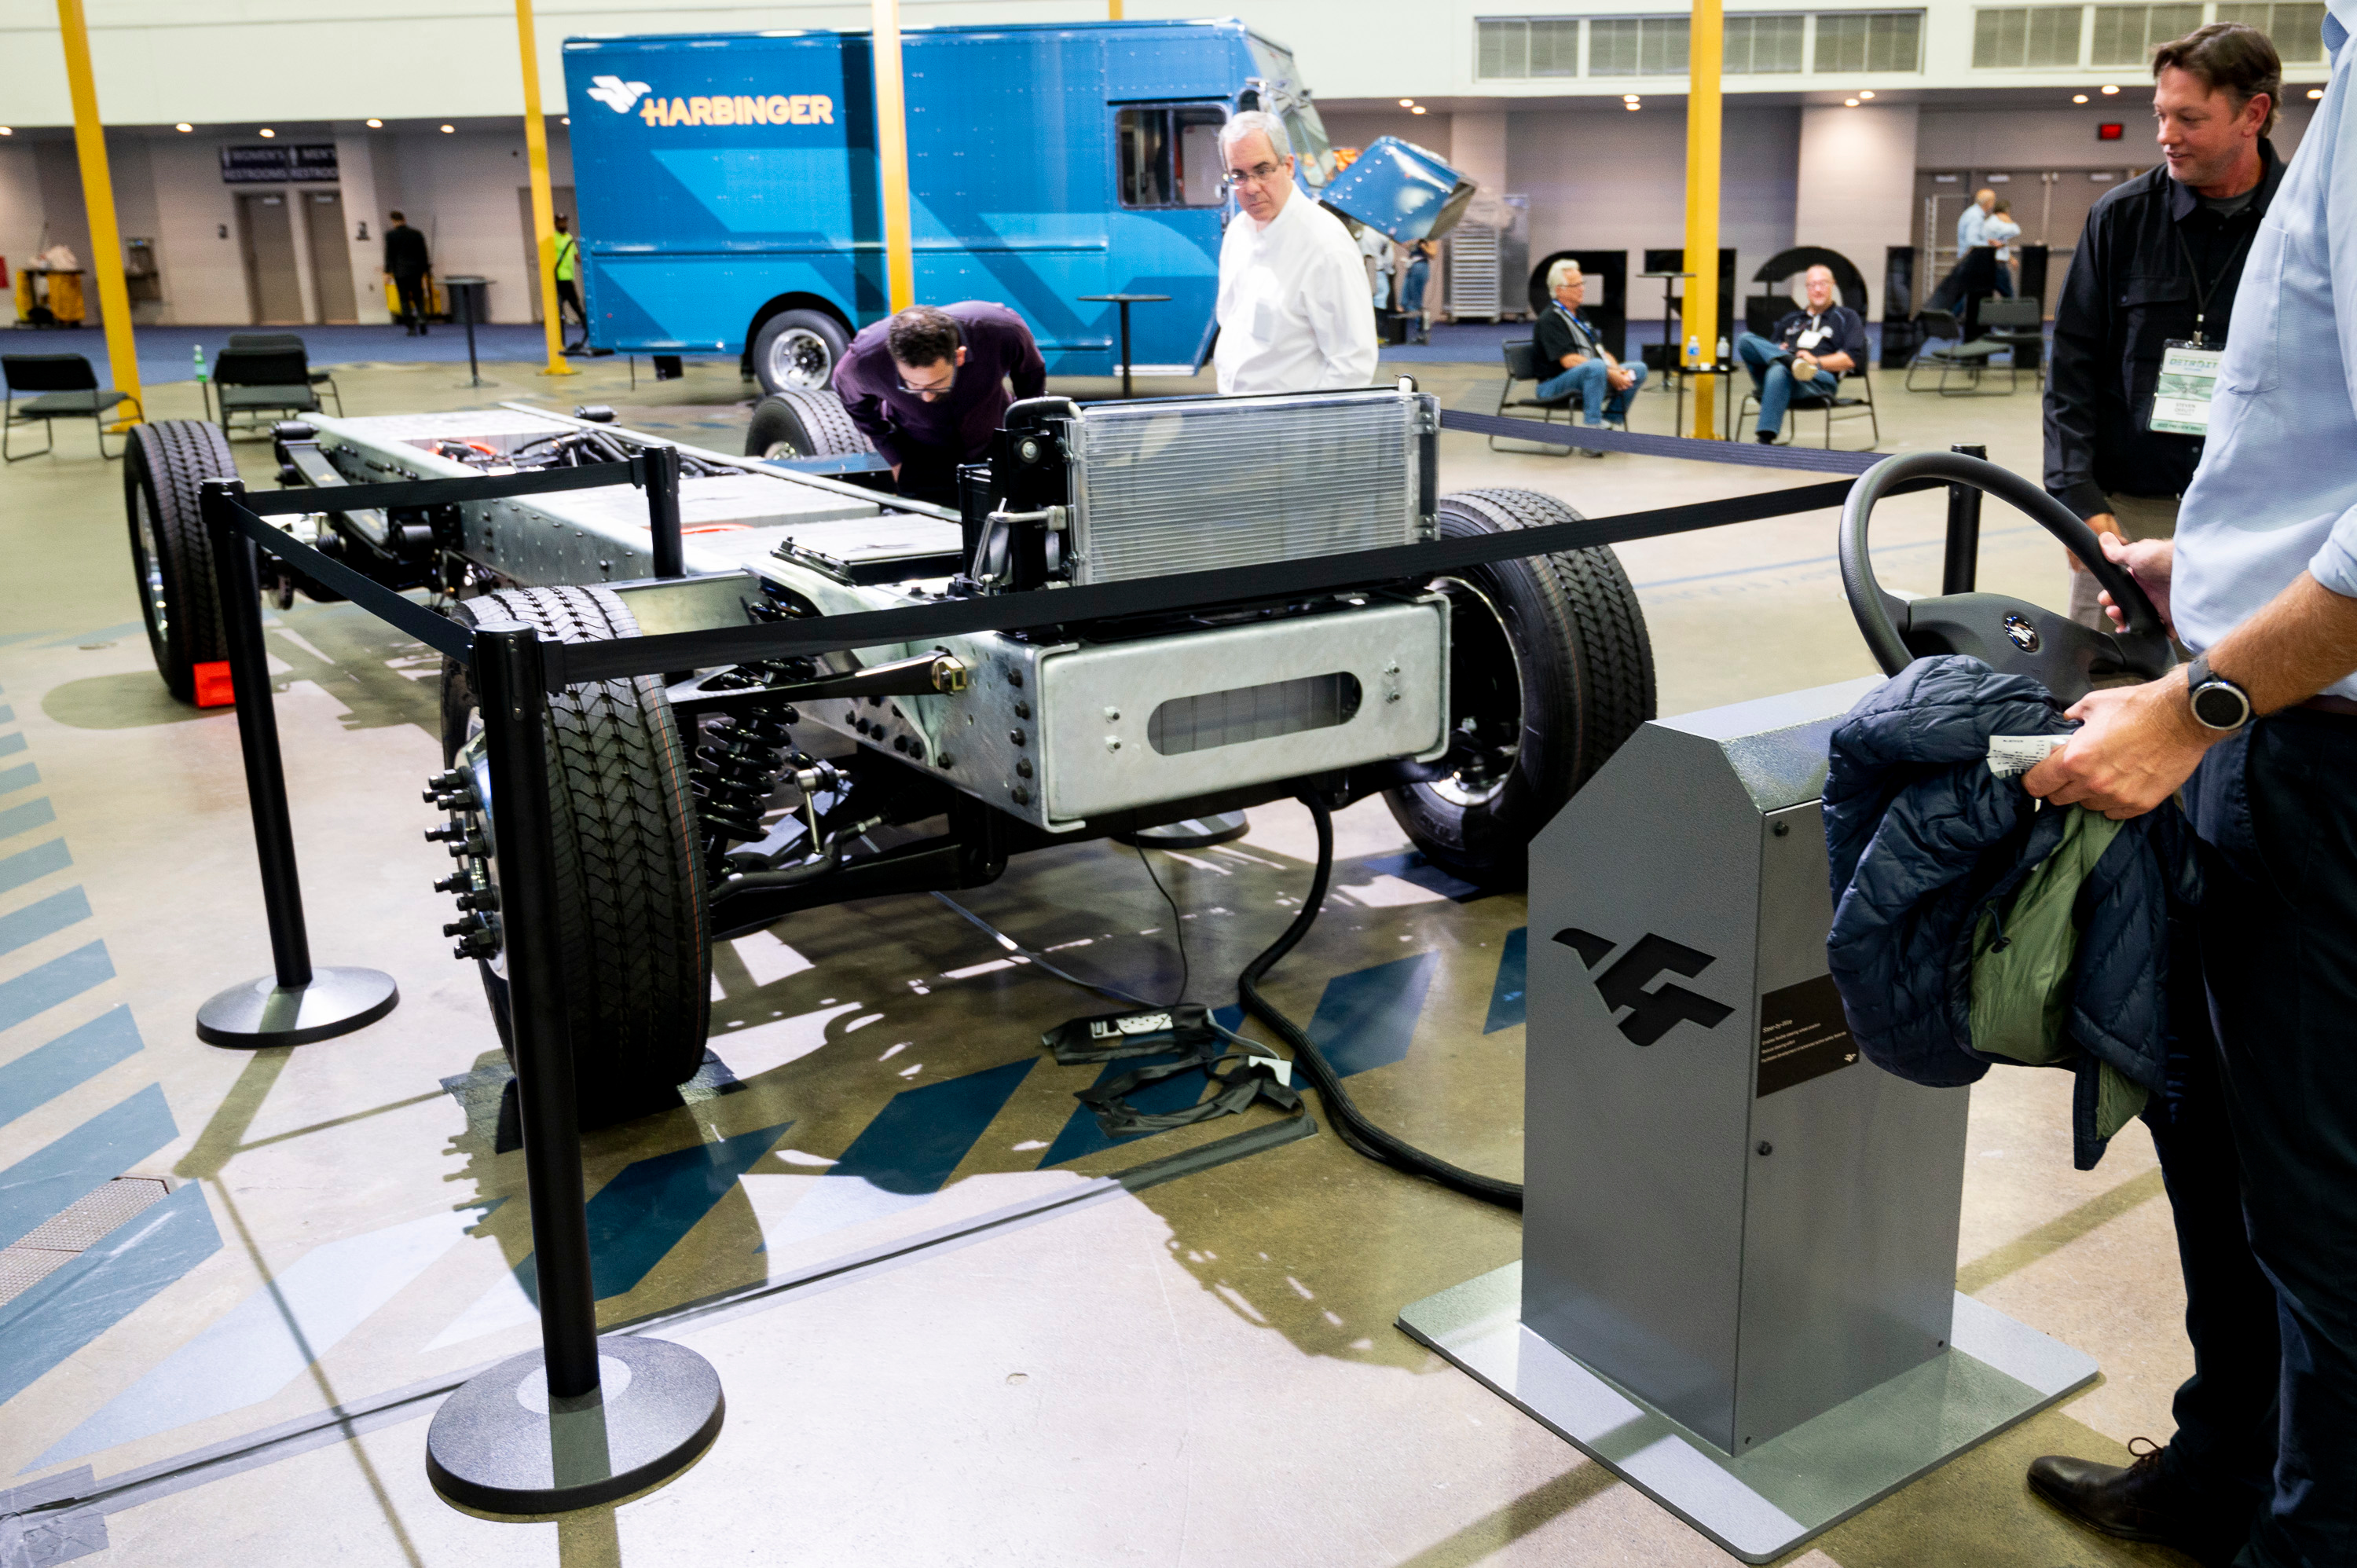 Guests can remotely steer a Harbinger truck chassis in the Harbinger booth during the 2022 North American International Auto Show at Huntington Place in Detroit on Wednesday, Sept. 14 2022.